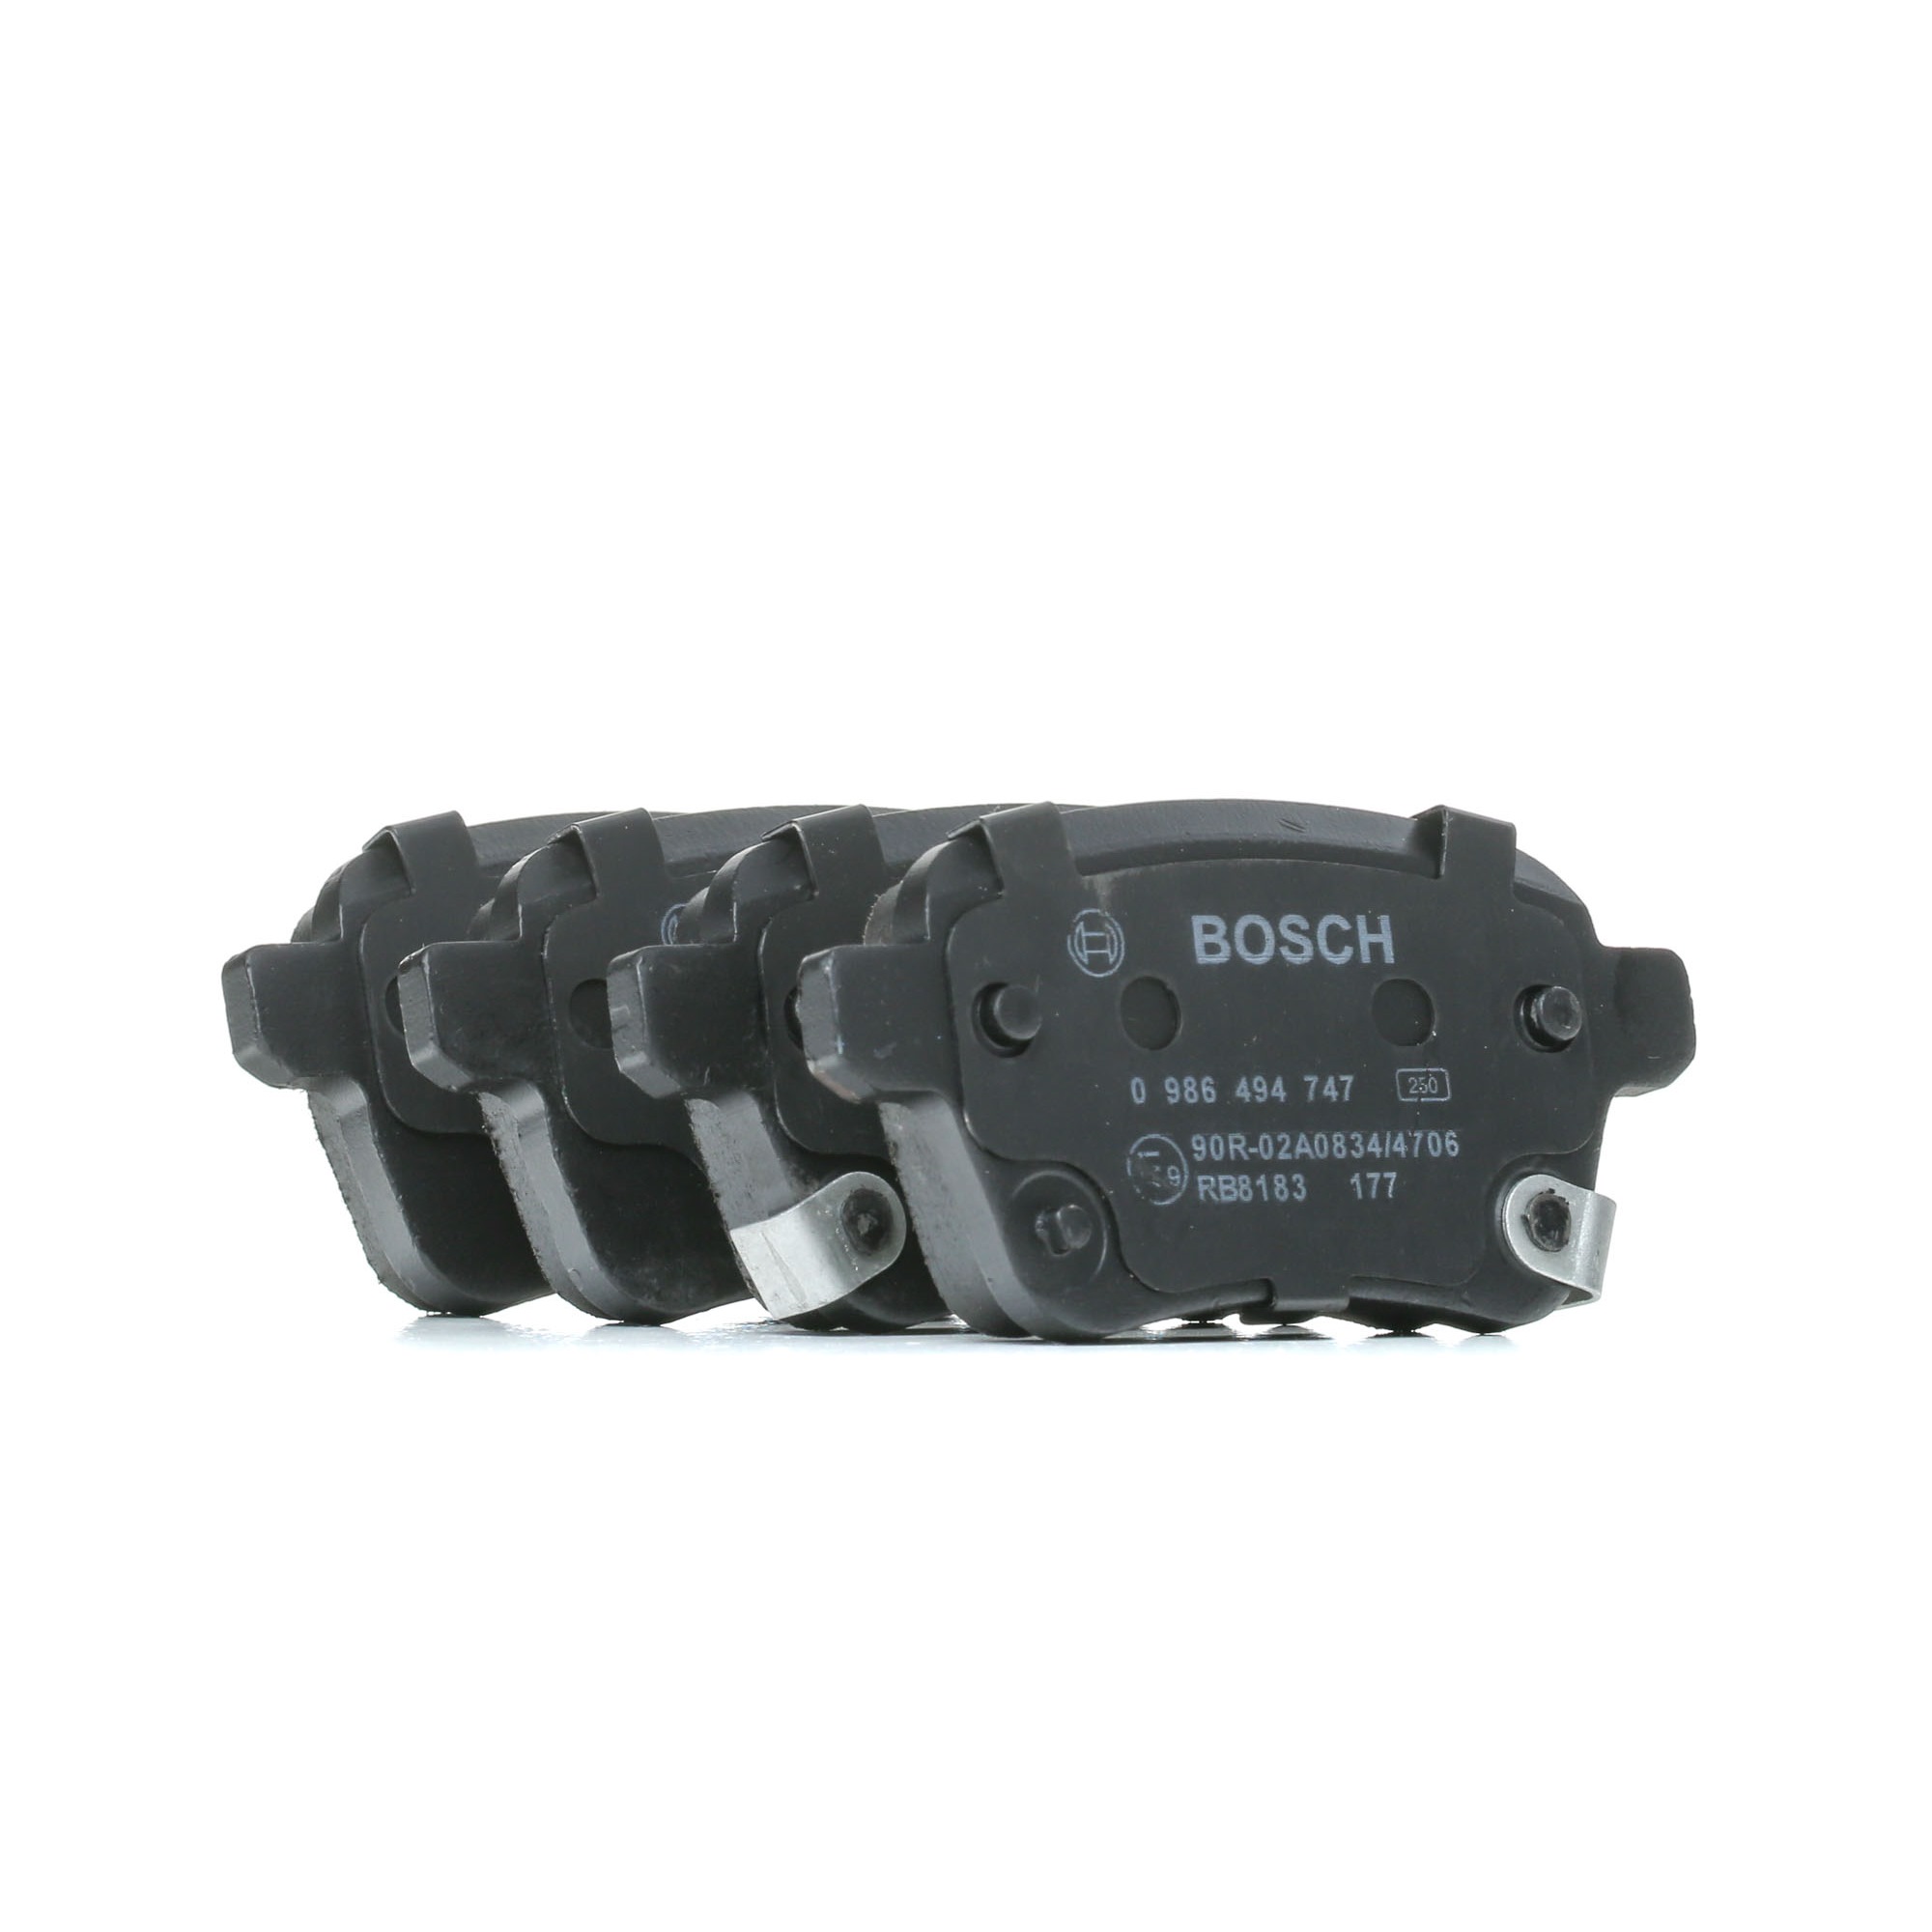 BOSCH 0 986 494 747 Brake pad set Low-Metallic, with integrated wear warning contact, with acoustic wear warning, with bolts/screws, with accessories